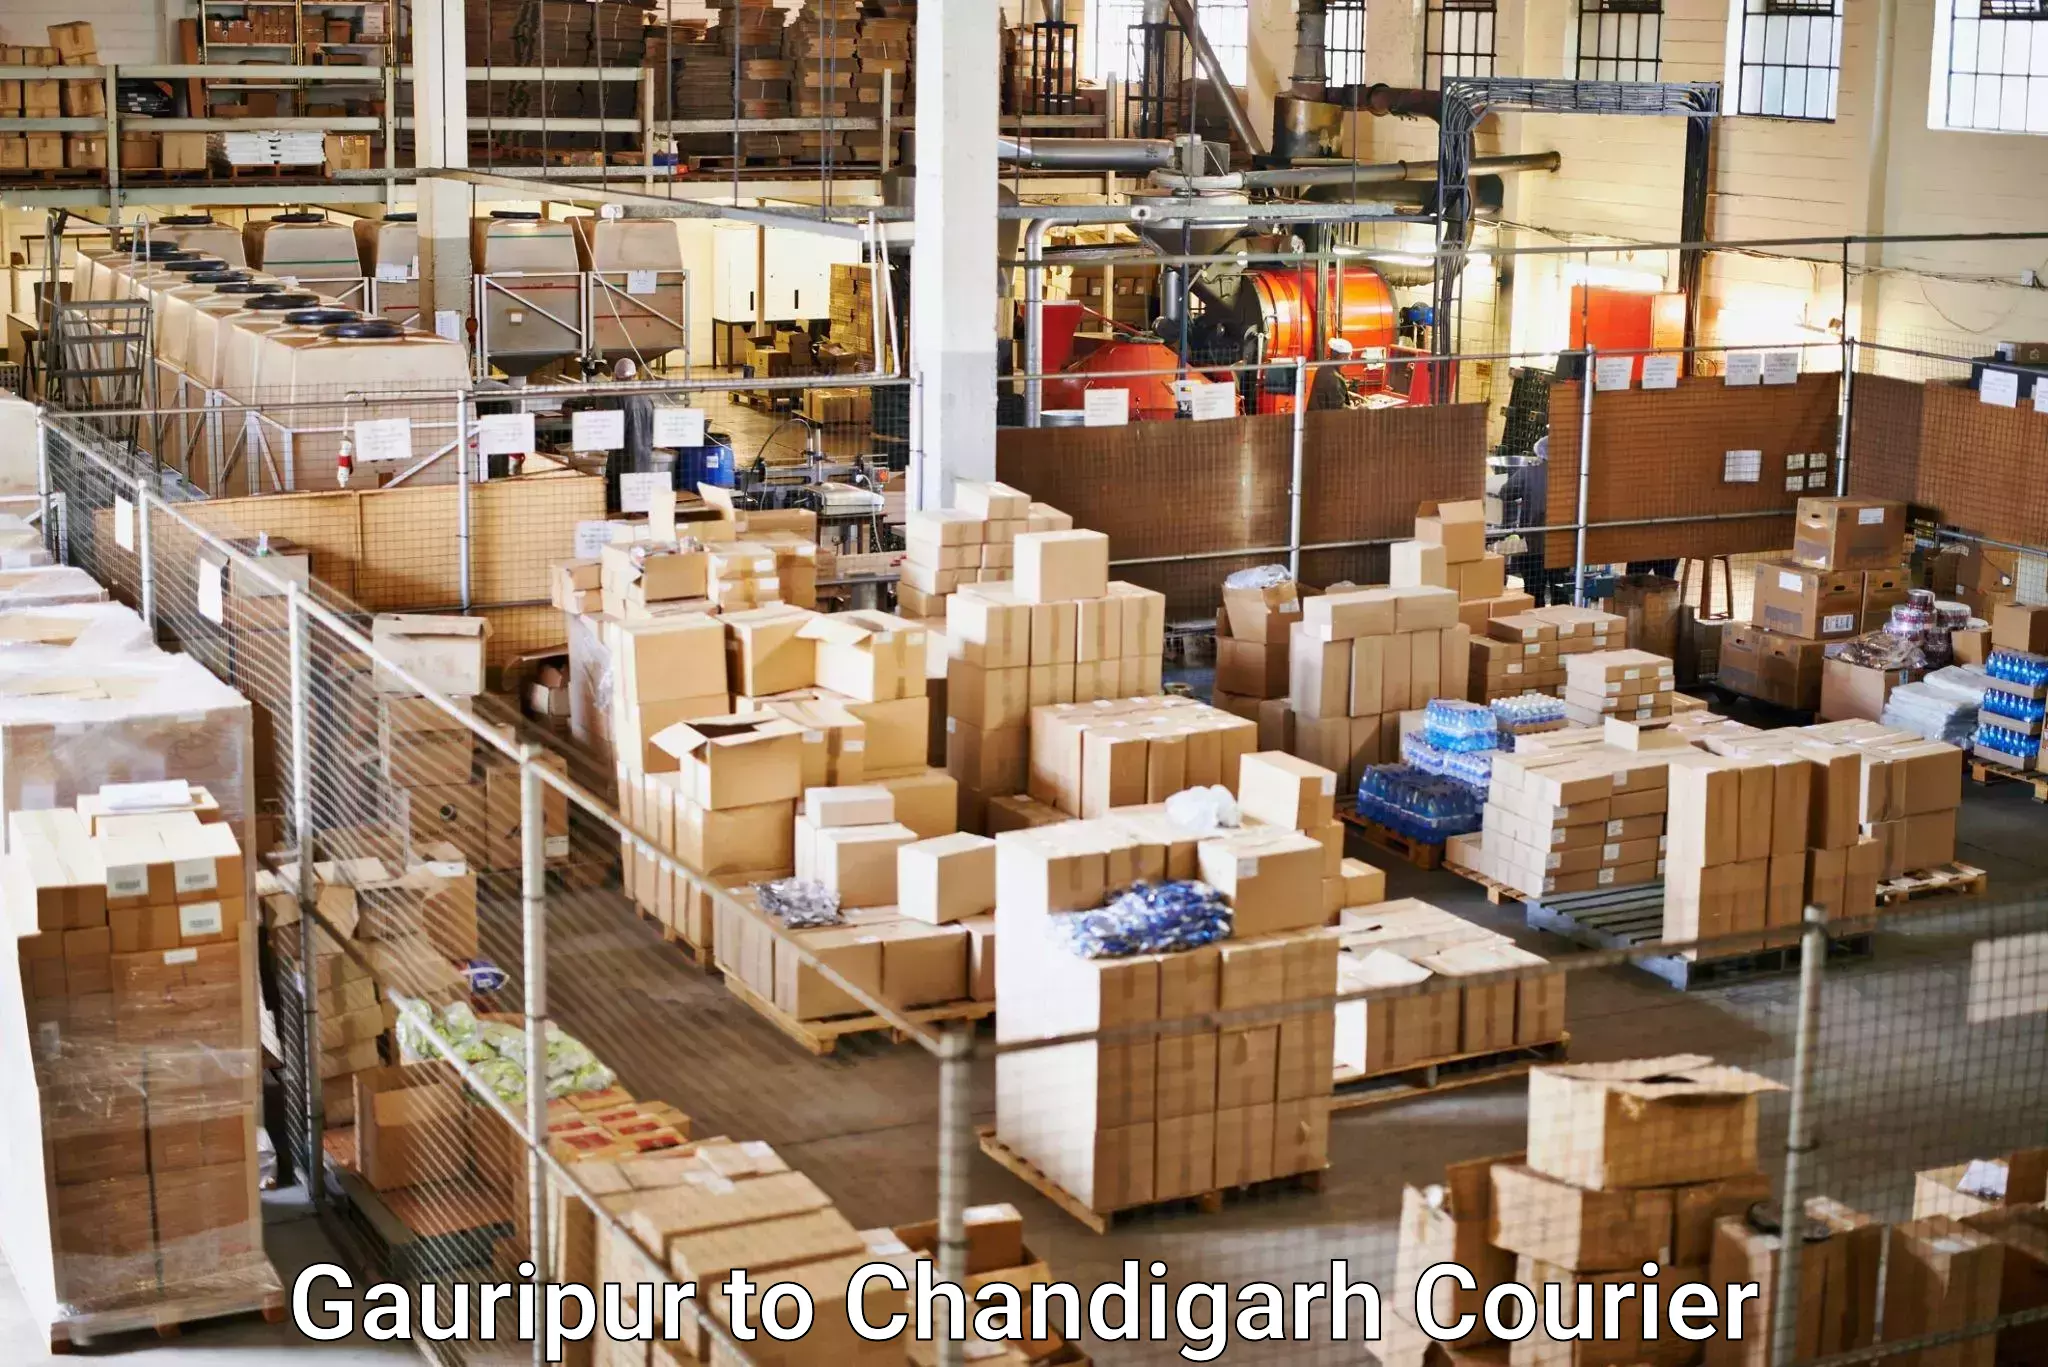 Reliable delivery network Gauripur to Chandigarh